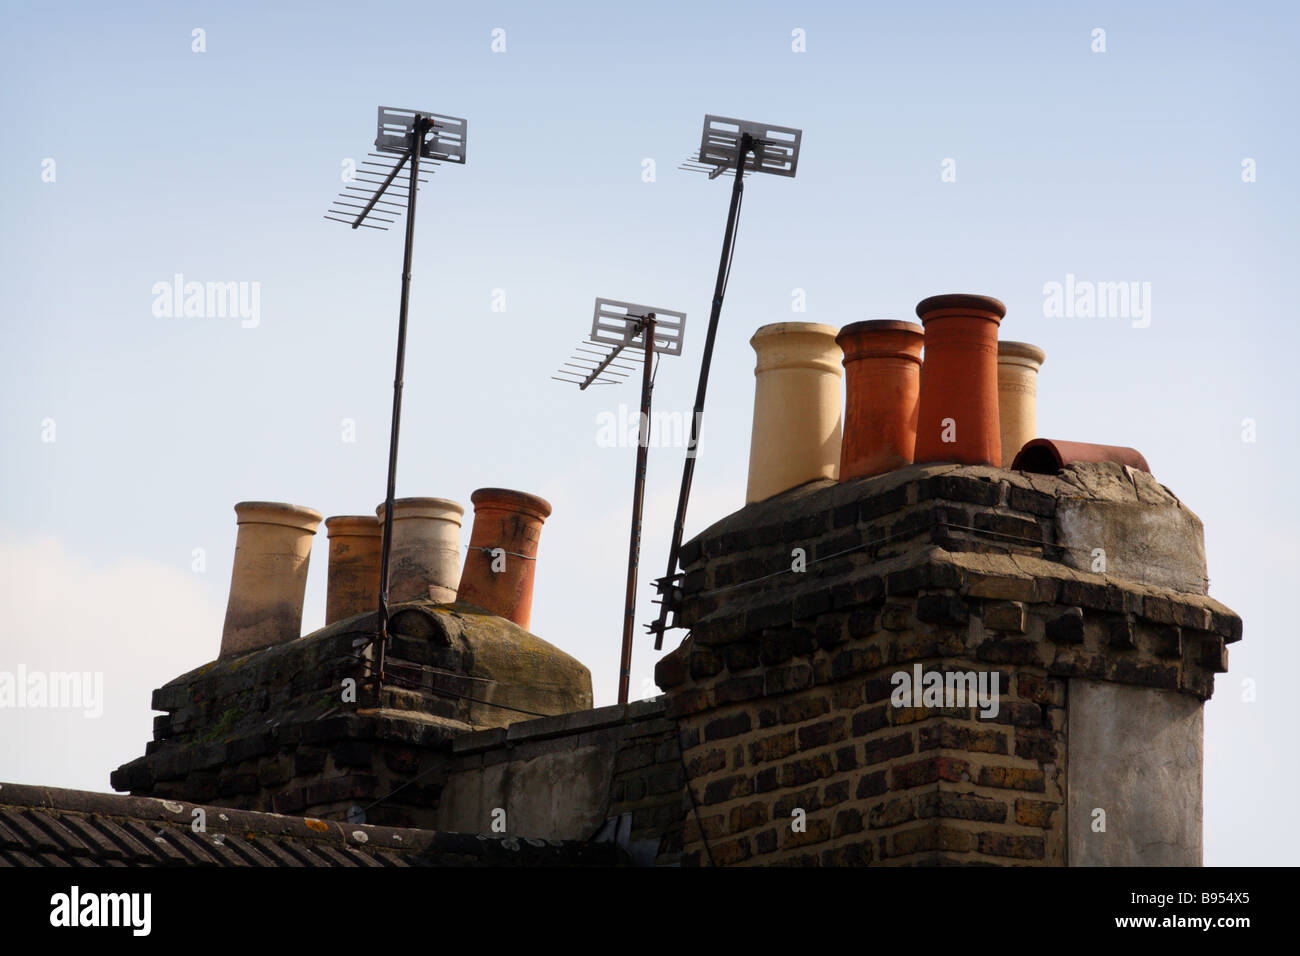 Television Ariels on top of chimneys on a blue sky. Stock Photo